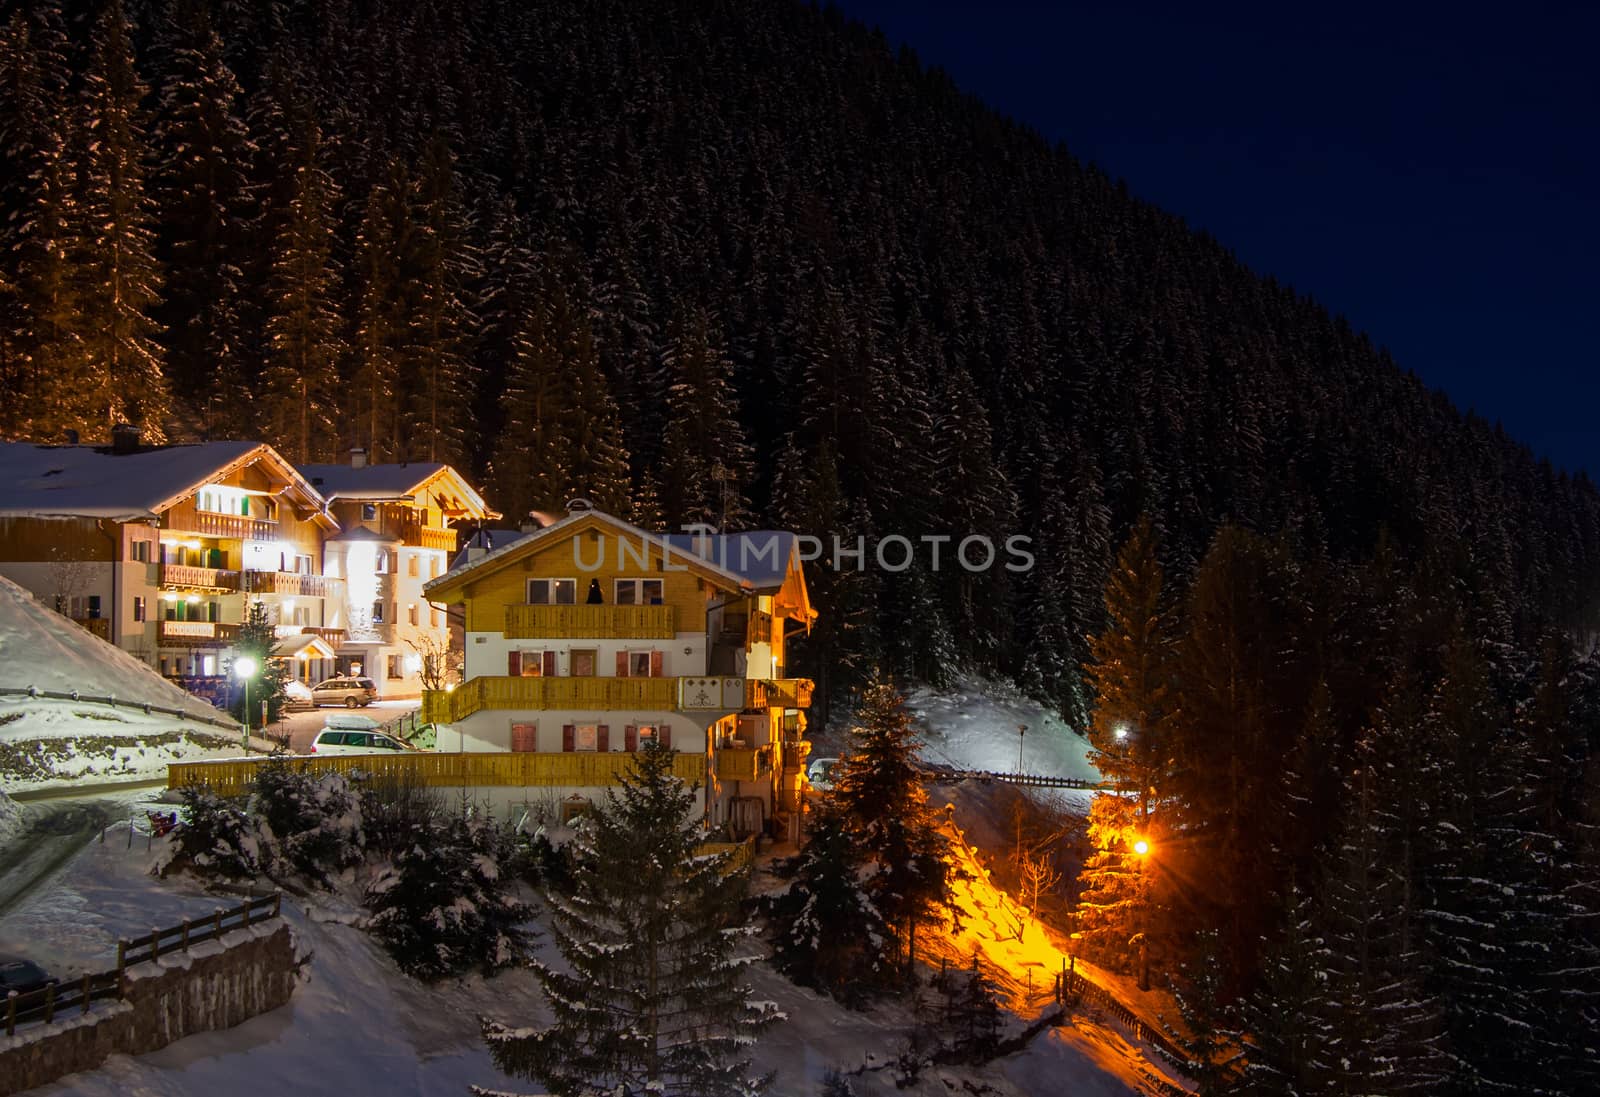 Night view at the ski resort at the mountain slopes by straannick